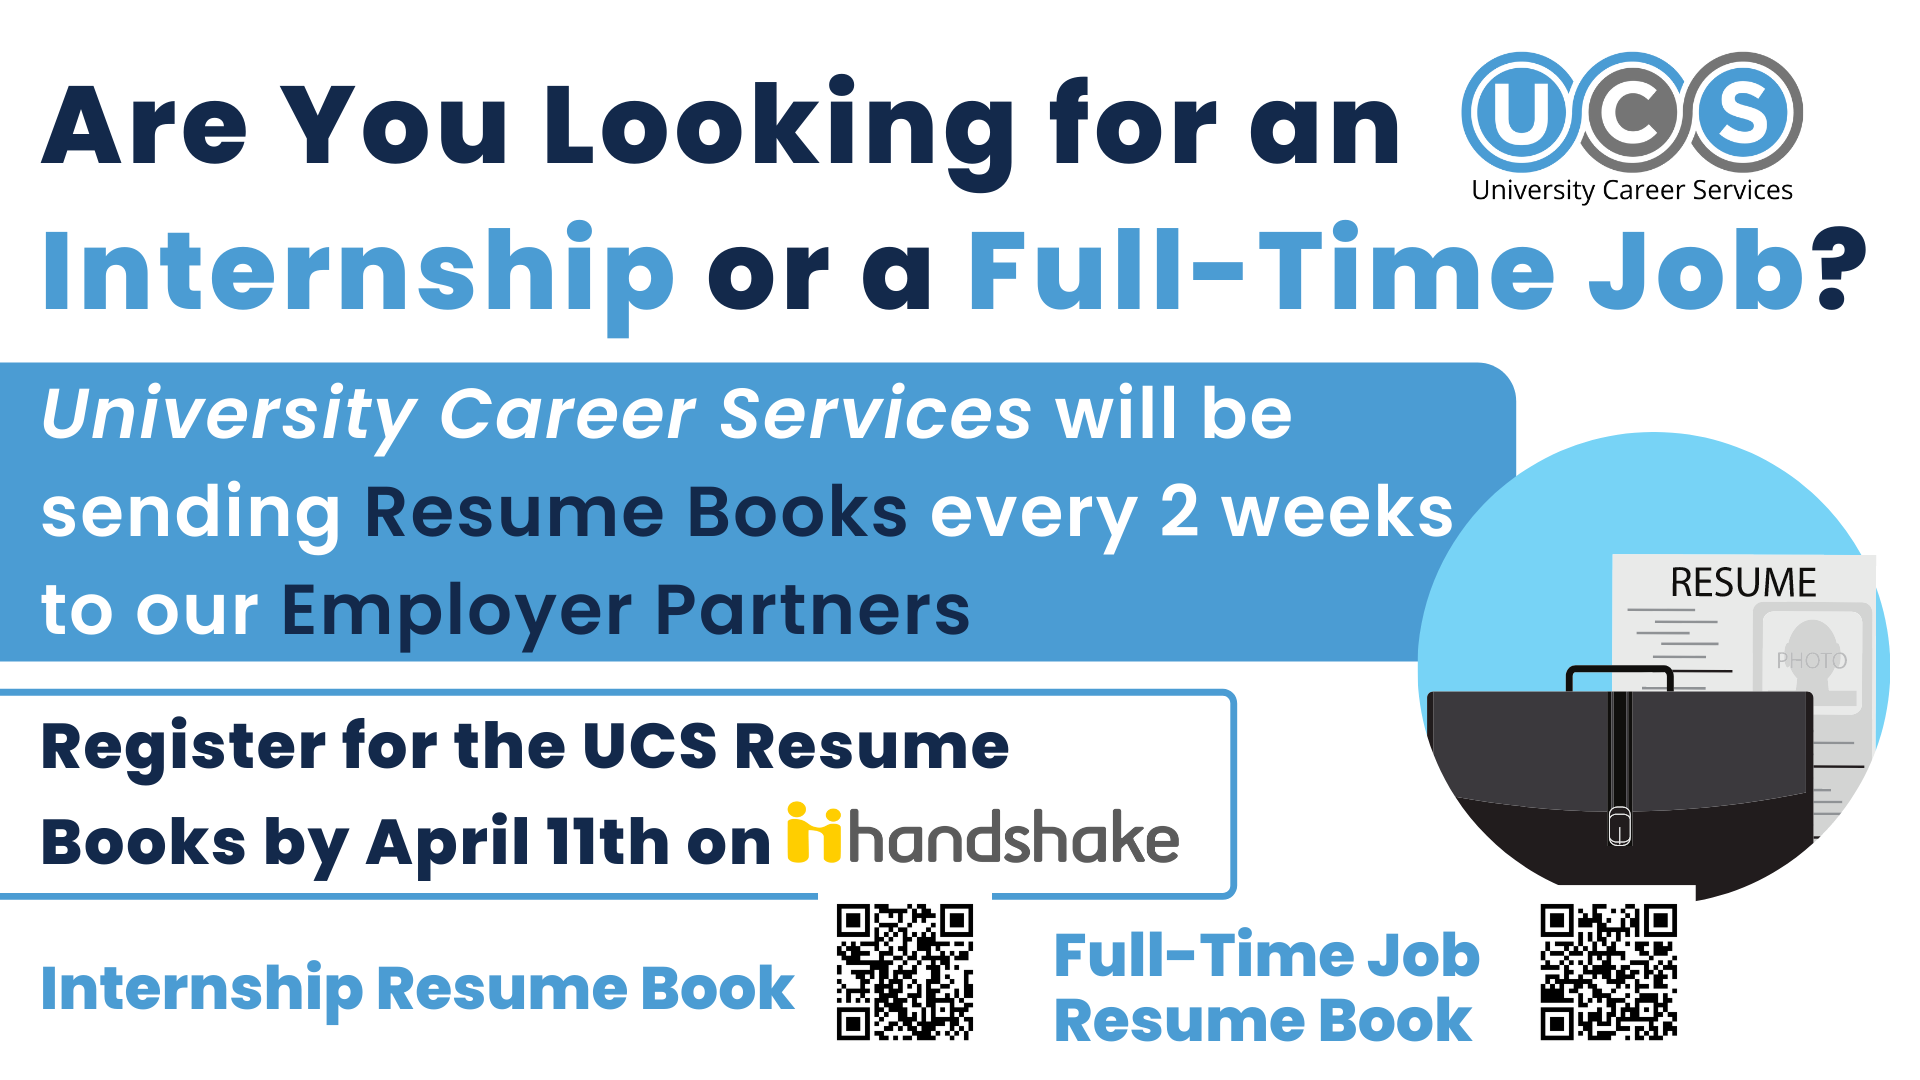 University Career Services will be sending Resume Books every 2 weeks to our Employer Partners